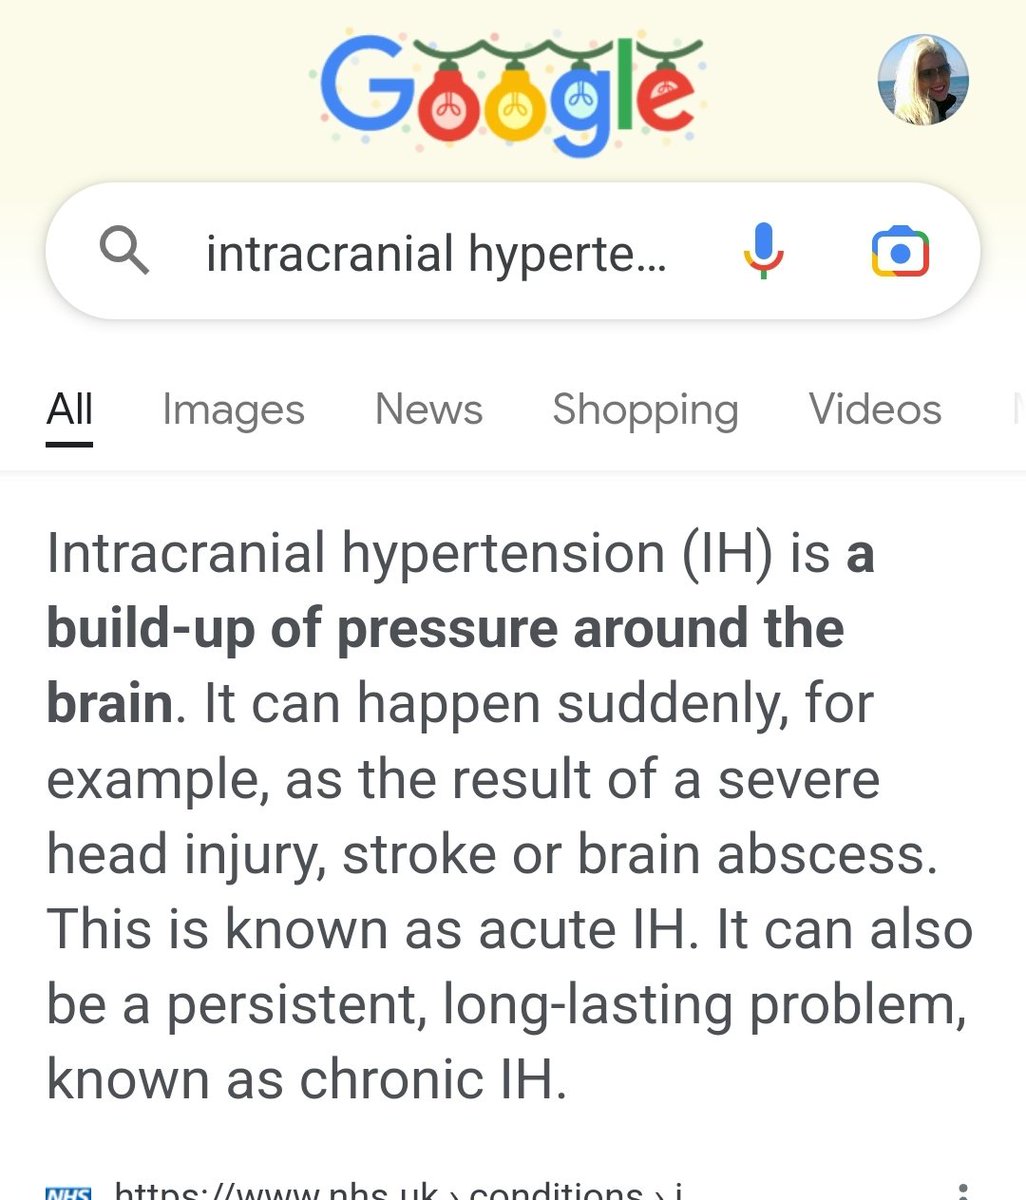 #diedsuddenly Intercranial Hypertension. One of the new side effects symptoms of being near the vaxxed. It's causing a systemic inflammation reaction in the unvaxxed. Many are reporting that they feel sick, sore joints, vertigo, headaches, nausea, extreme fatigue.